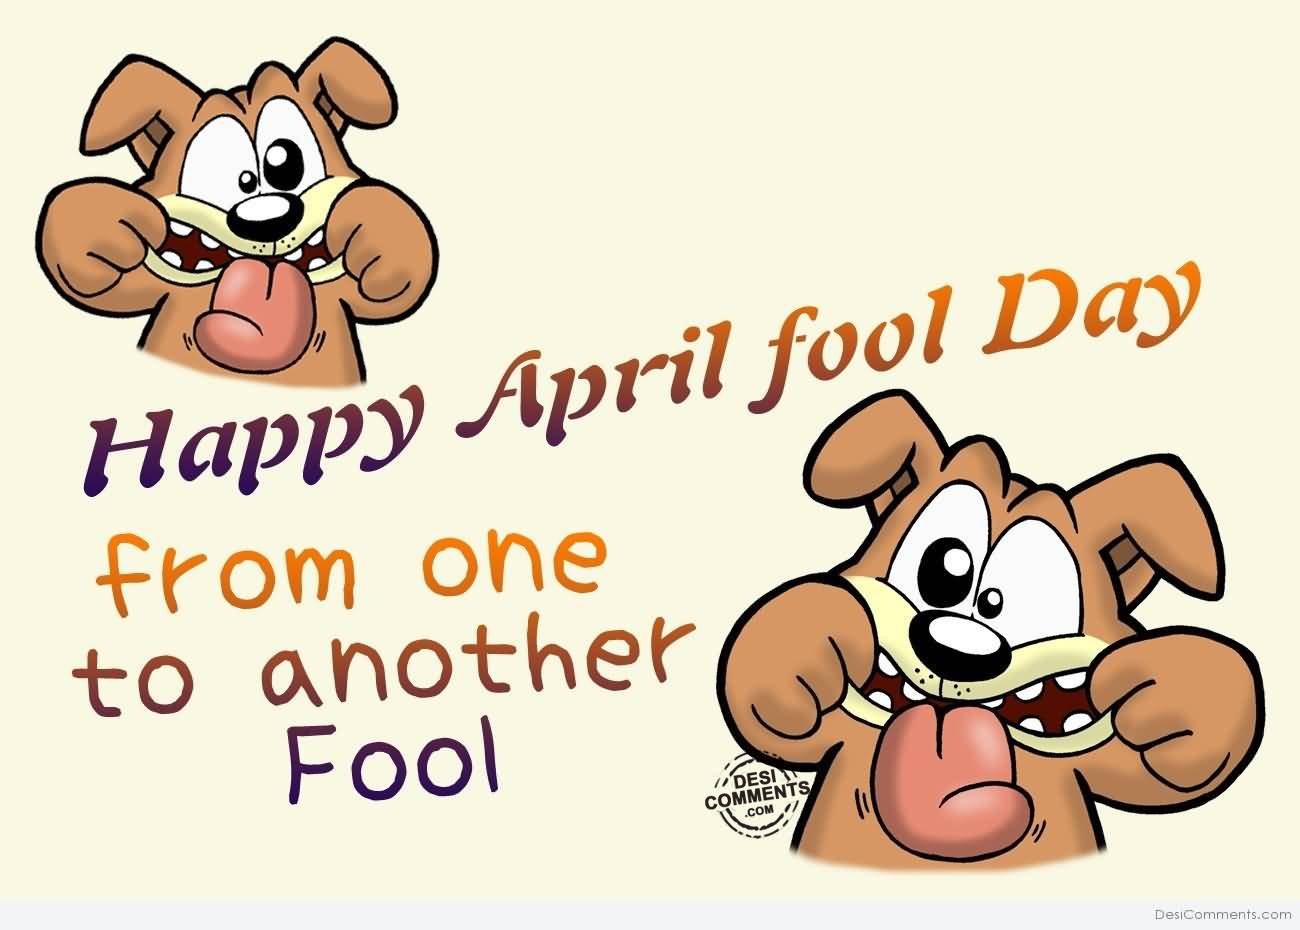 Happy April Fool Day From One To Another Fool